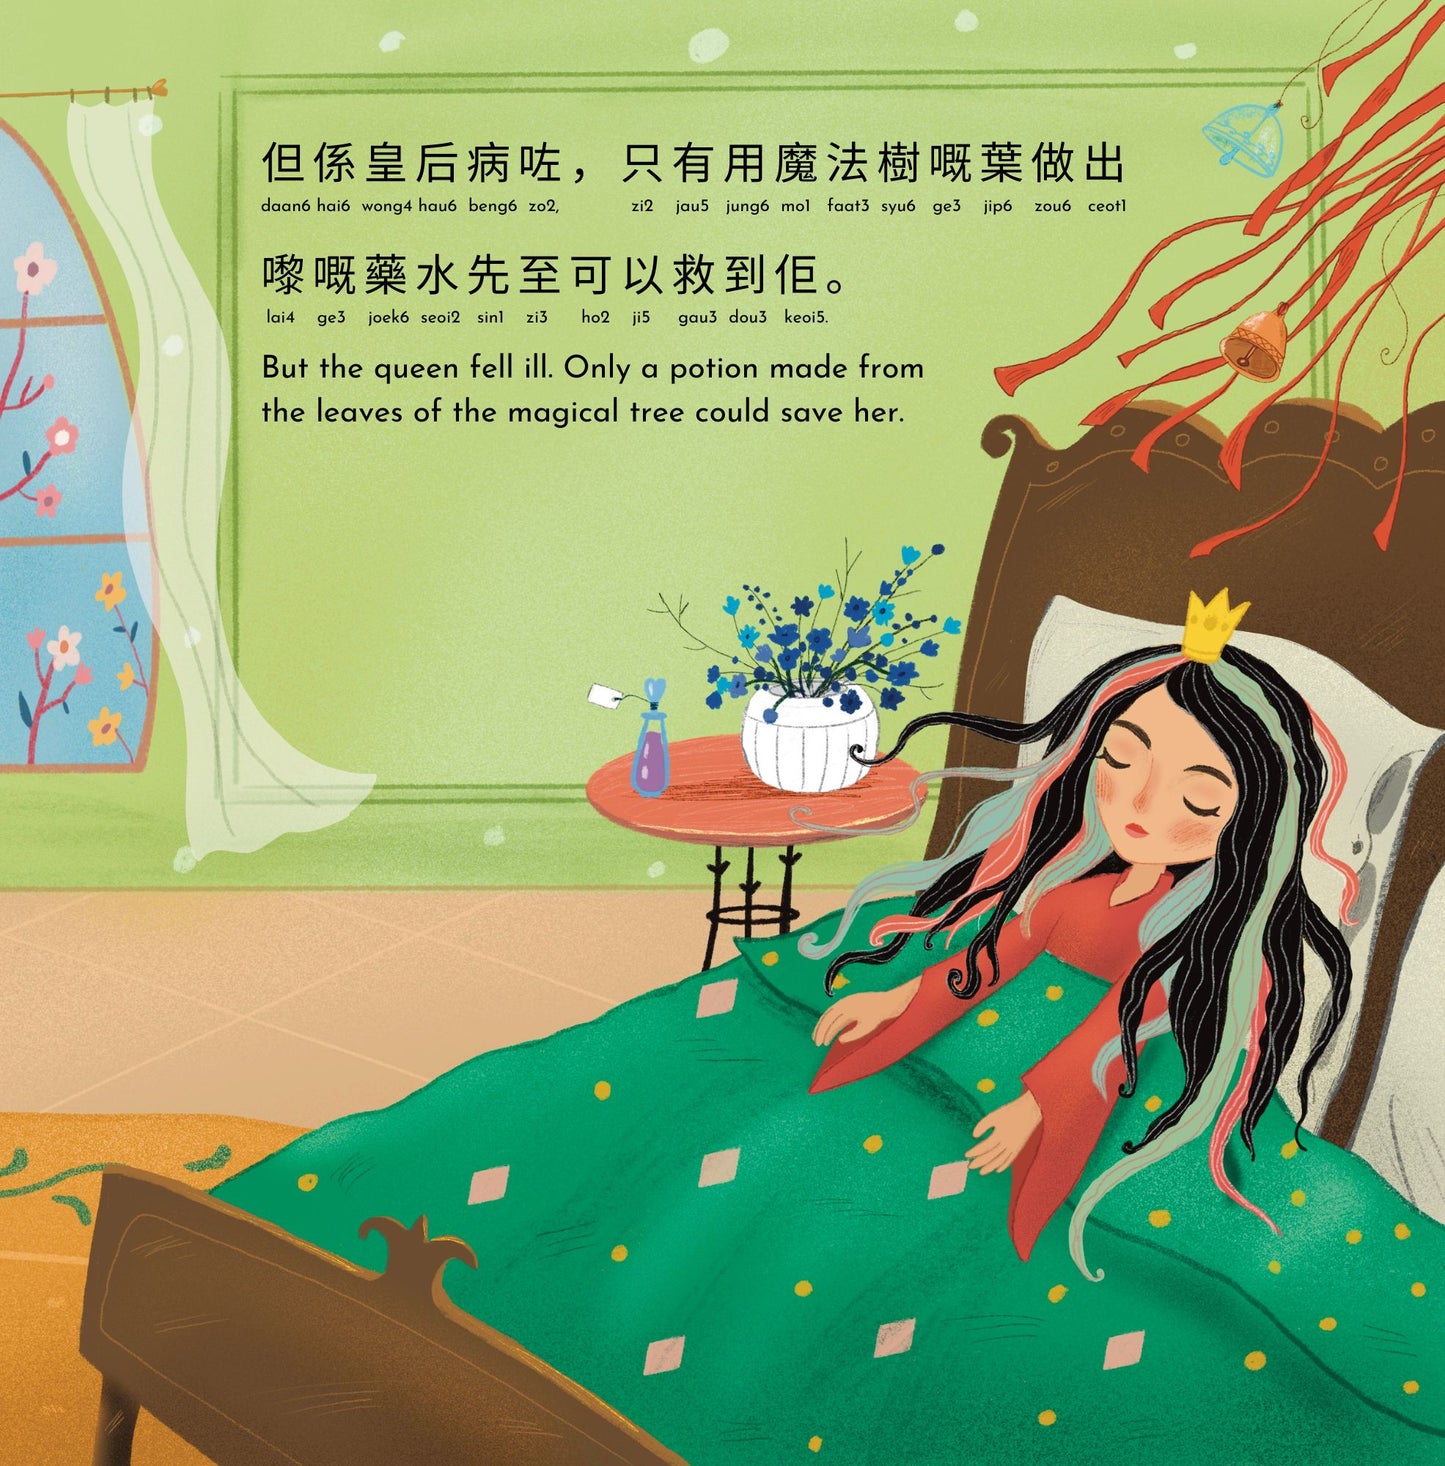 Rapunzel 長髮姑娘: (Bilingual Cantonese with Jyutping and English